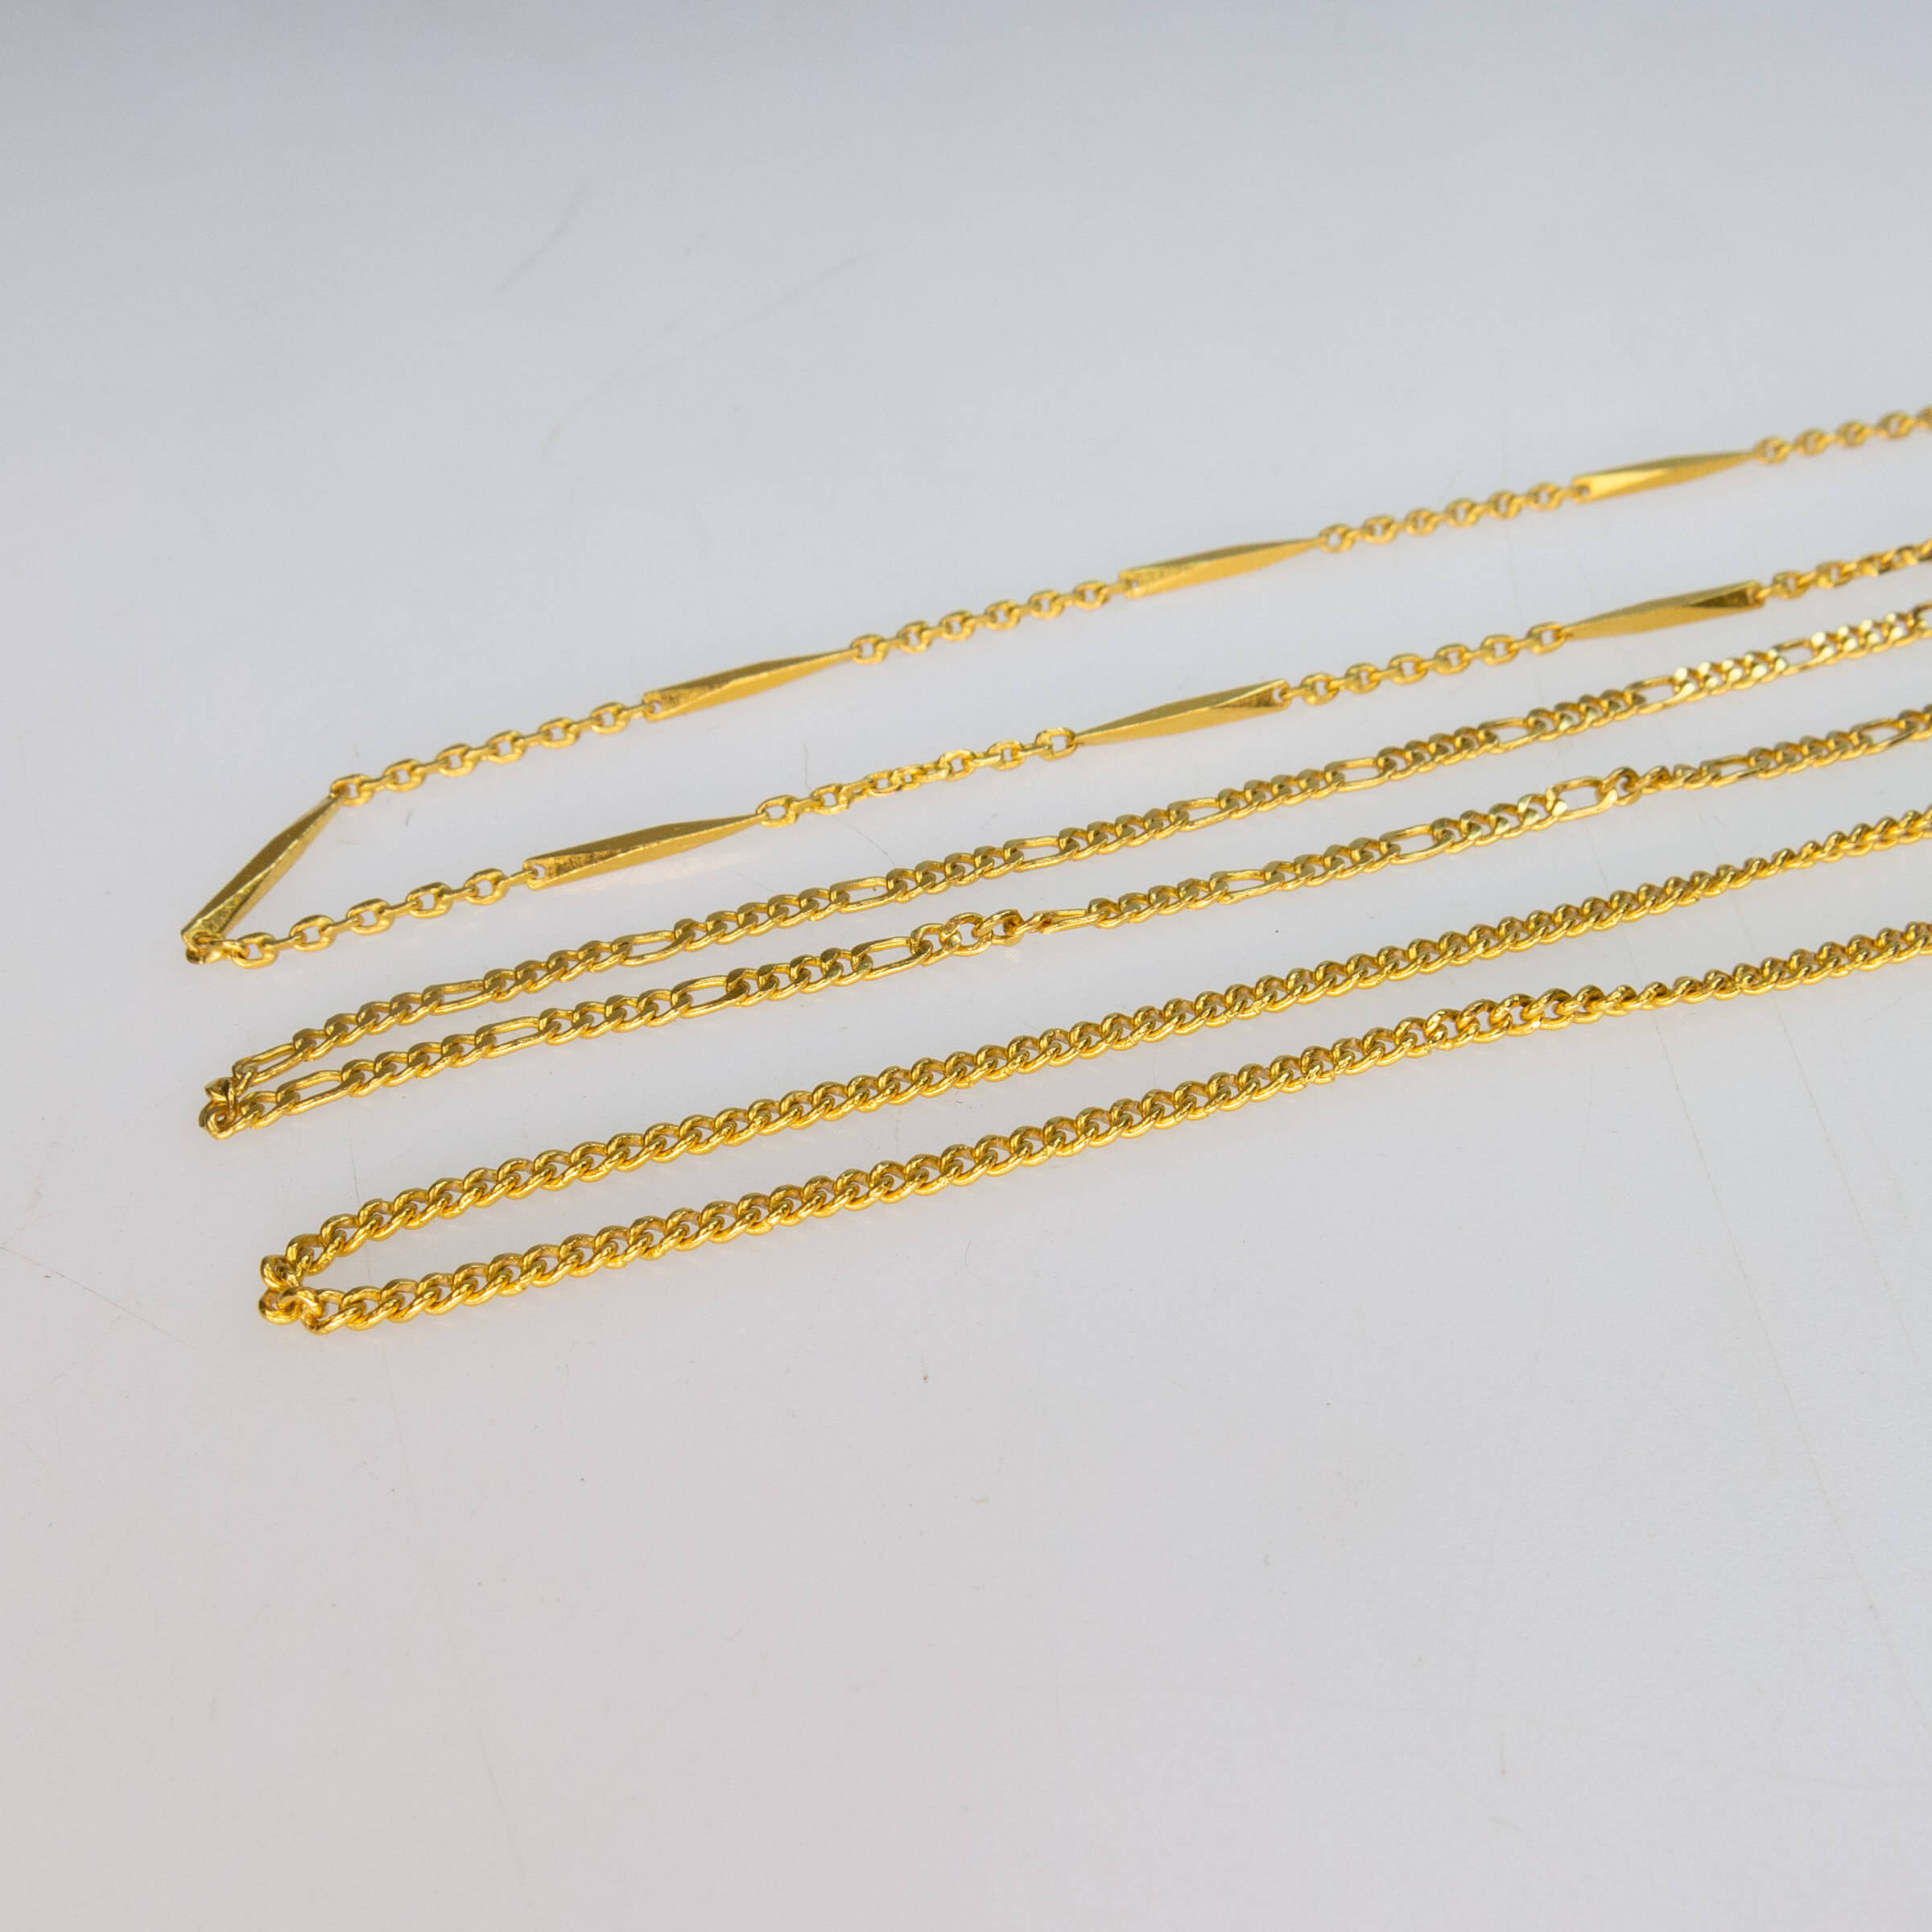 3 x 24k Yellow Gold Chains